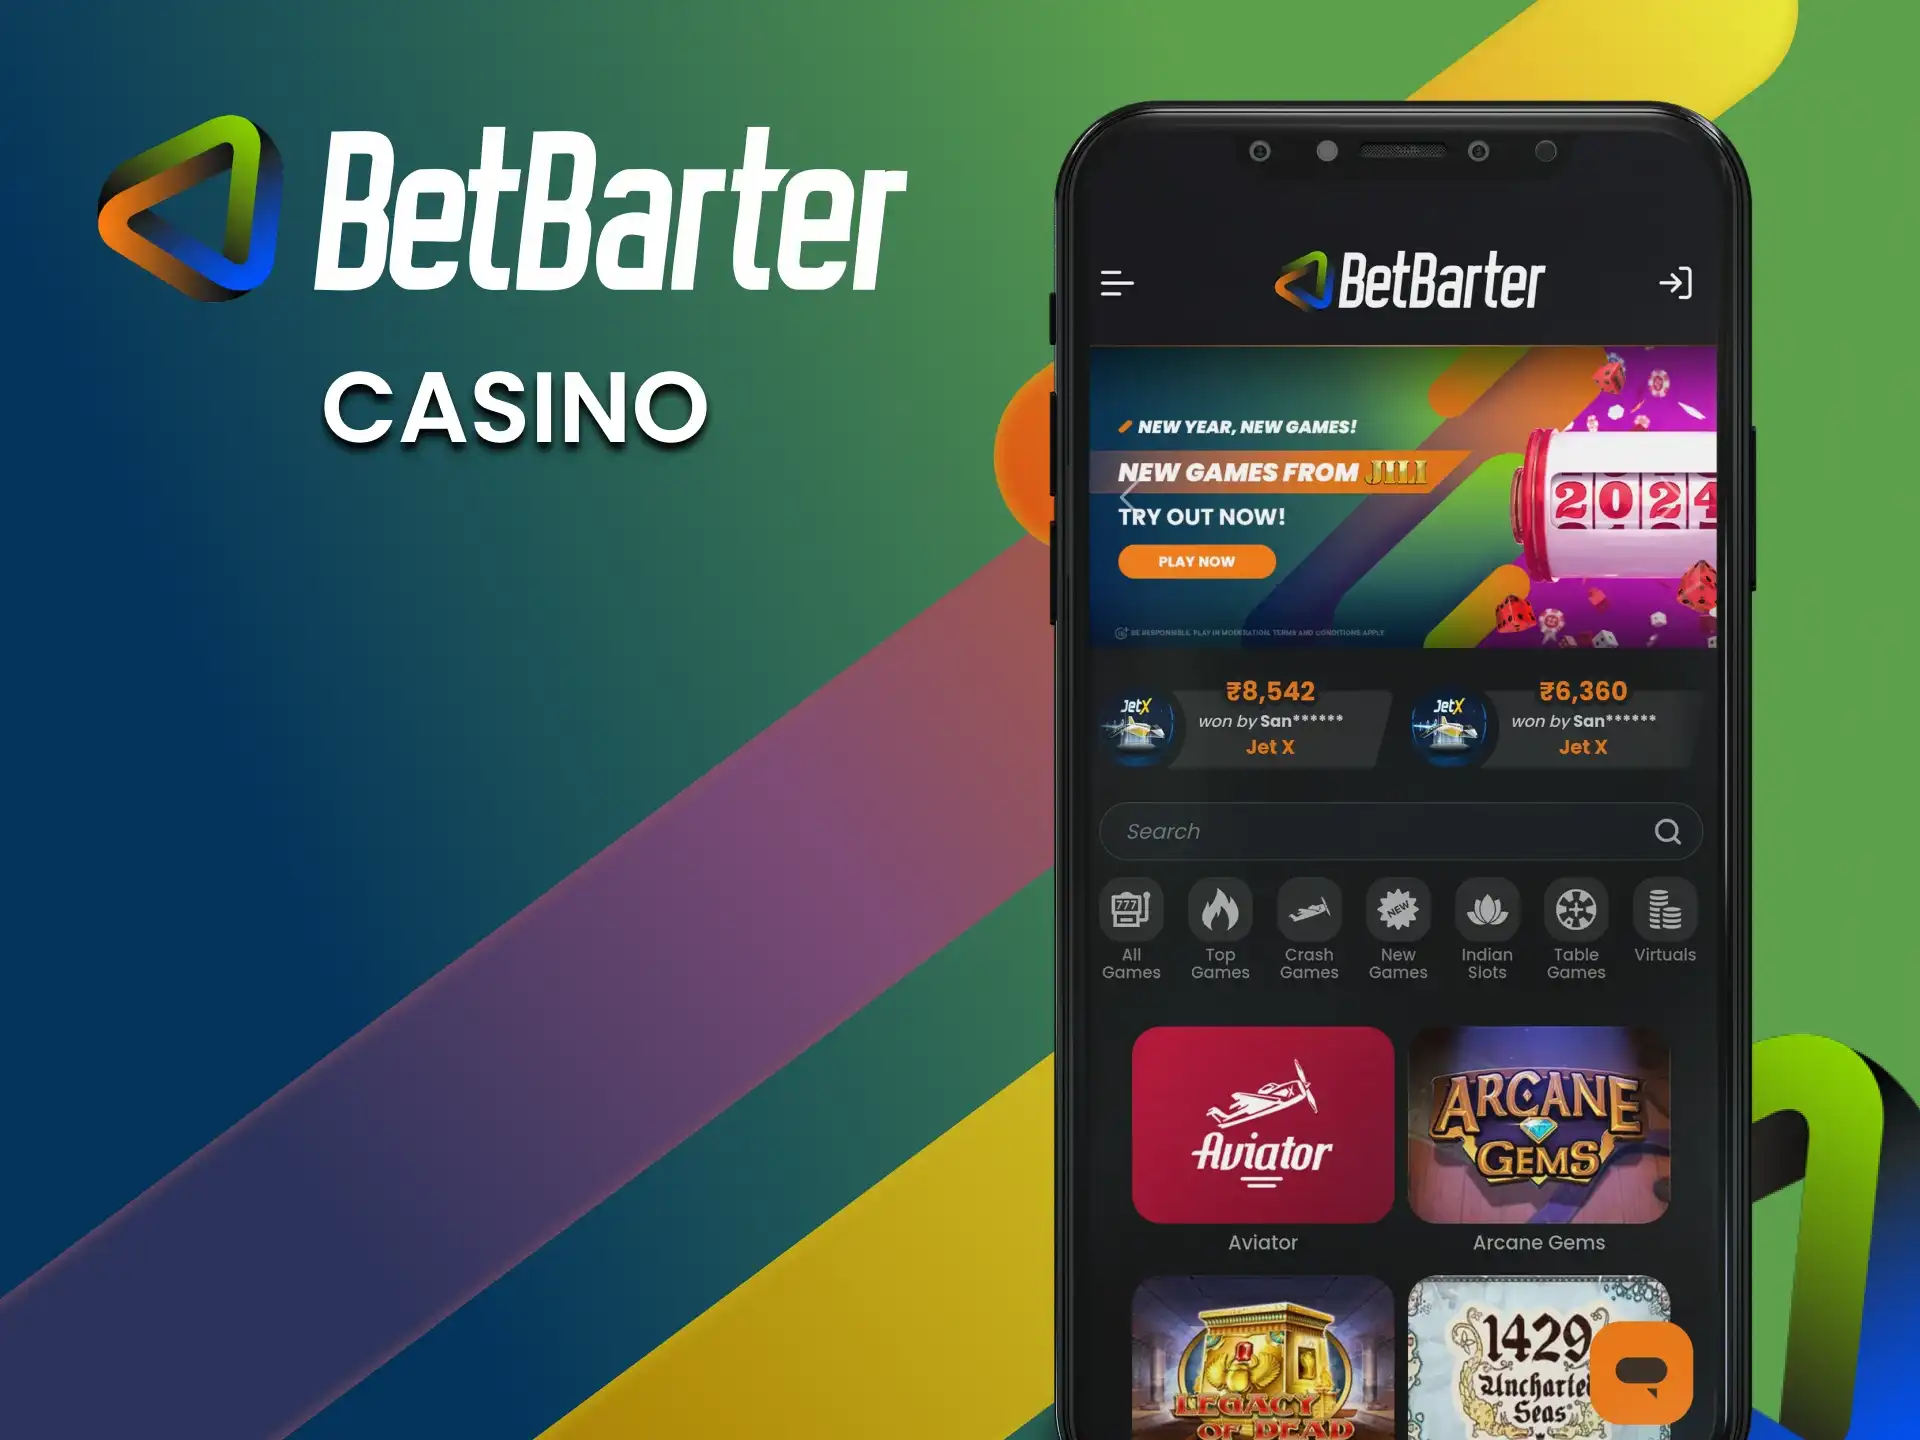 You will find only quality gambling entertainment only from proven suppliers in the app BetBarter.